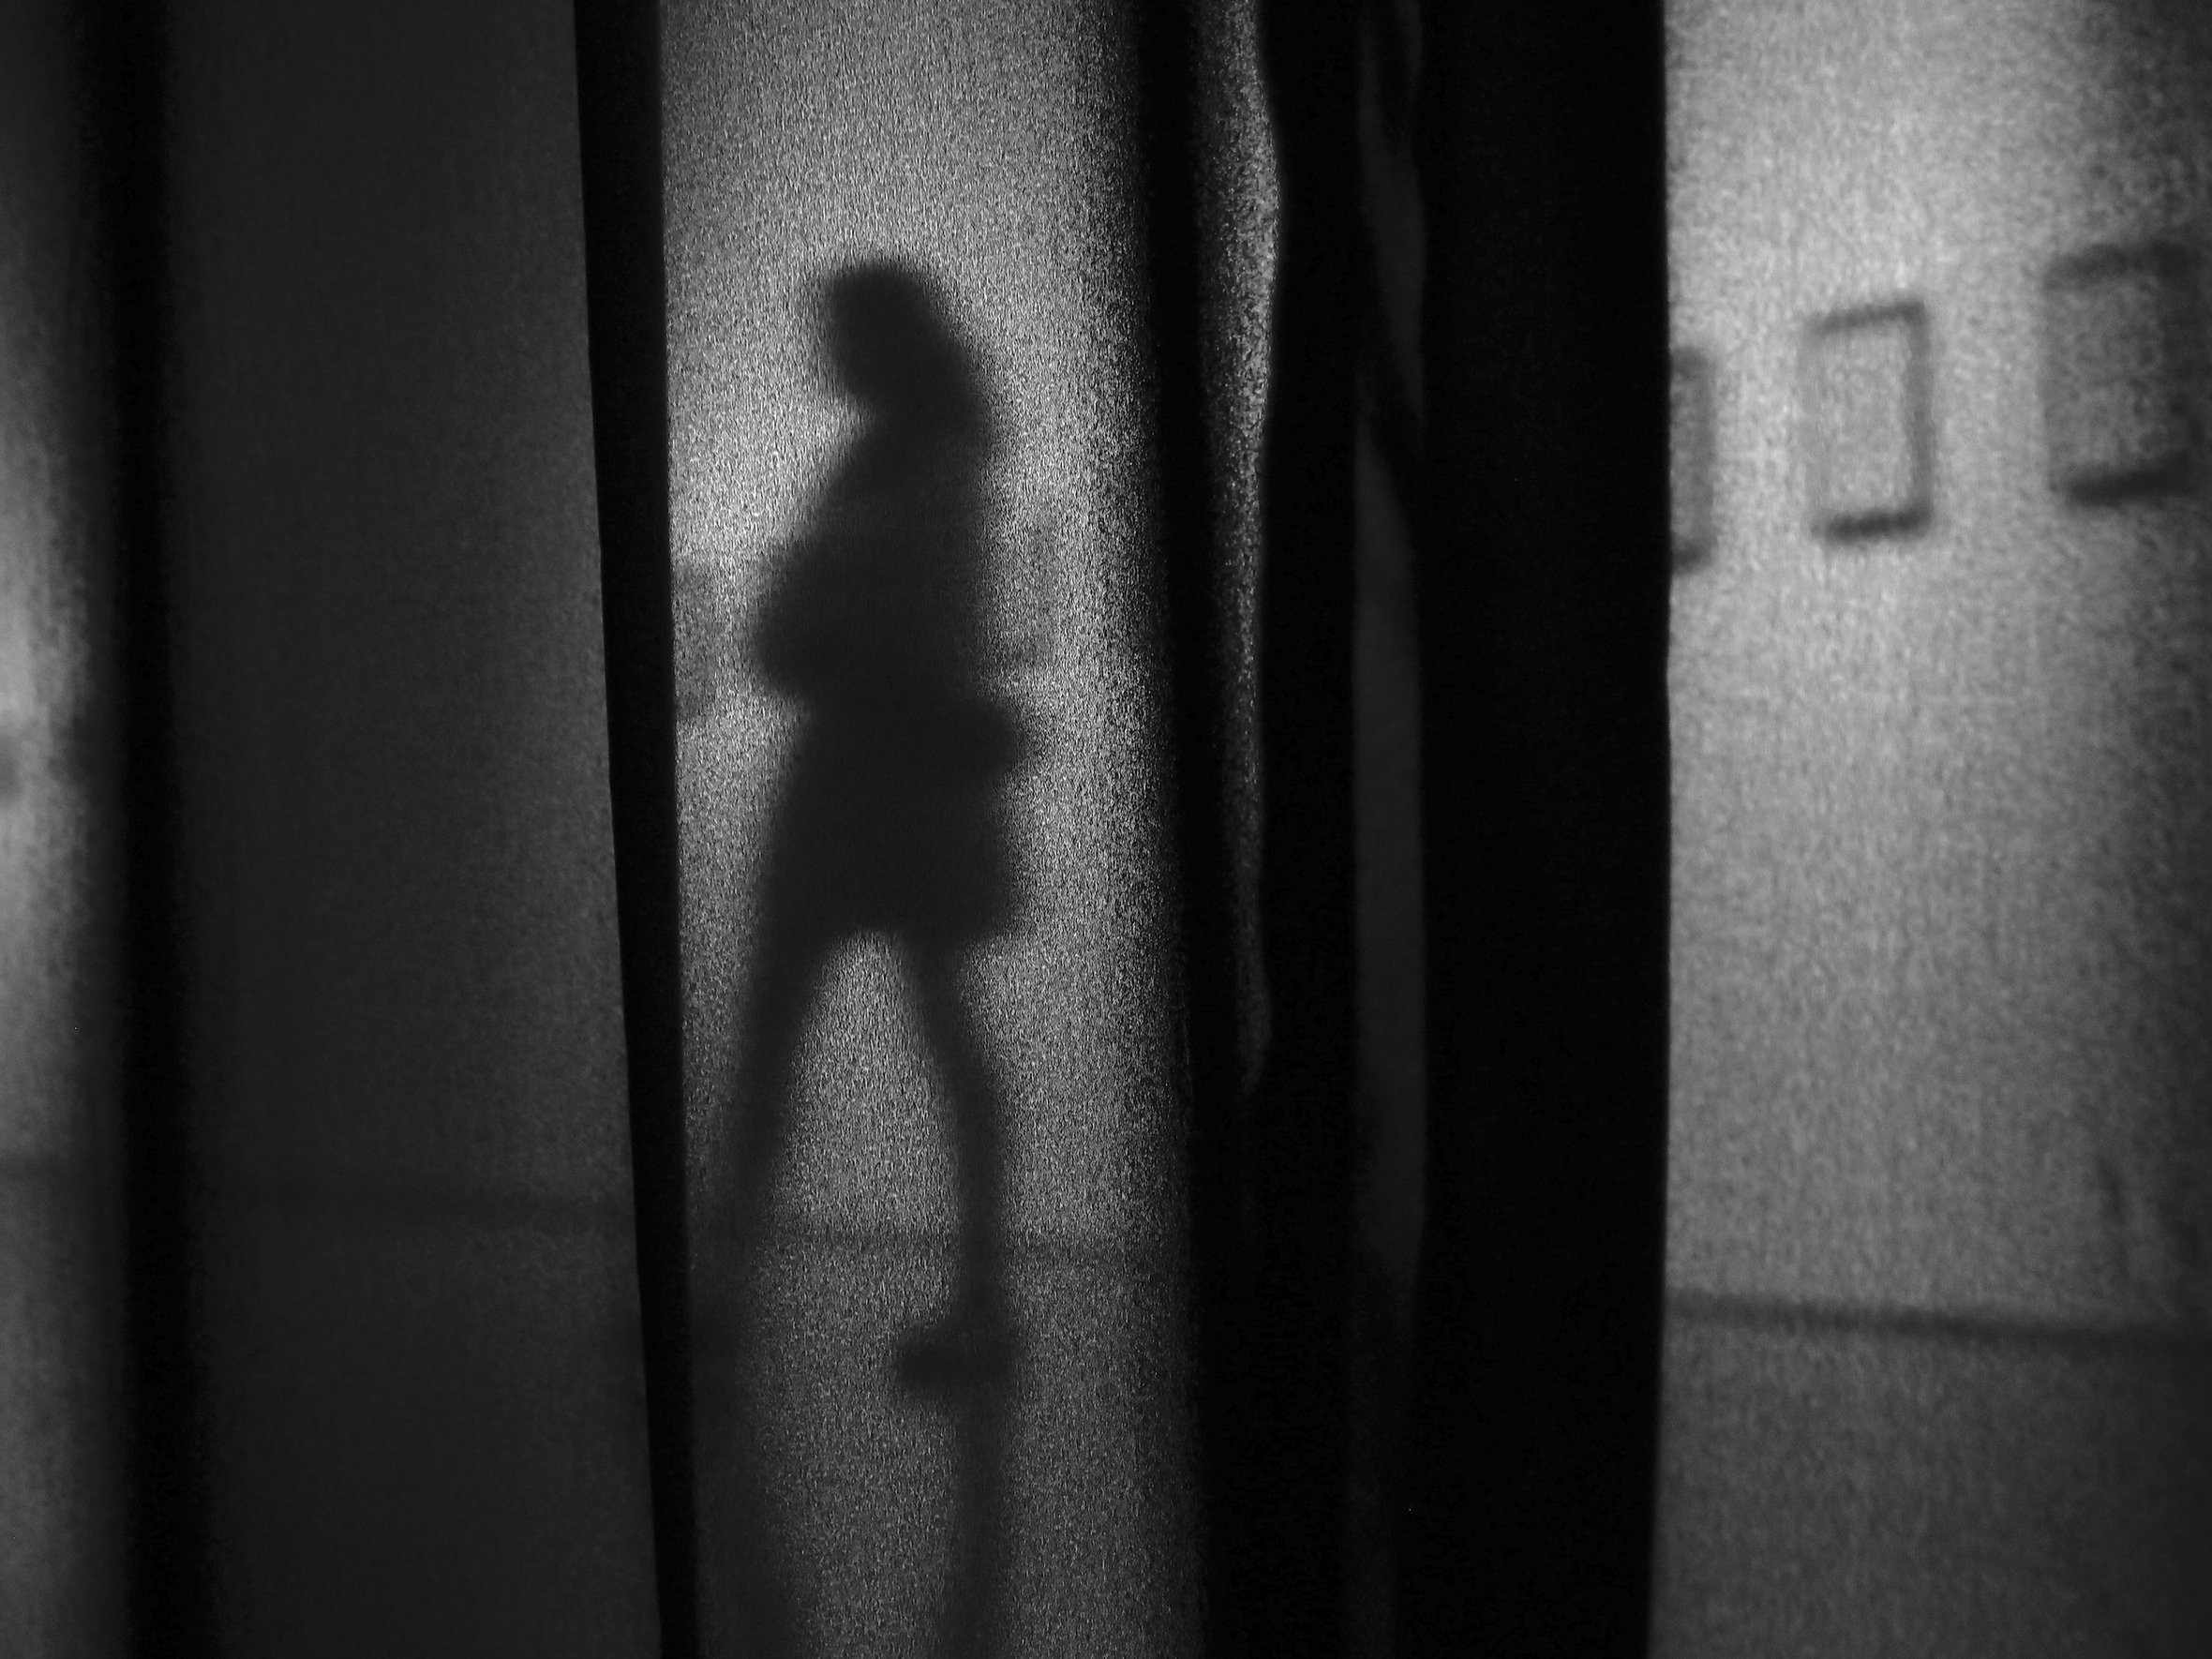 The silhouette of a girl in a skirt as she stands in a room with many same-size, evenly-spaced, square objects on the wall behind her seen through a gauzy curtain.